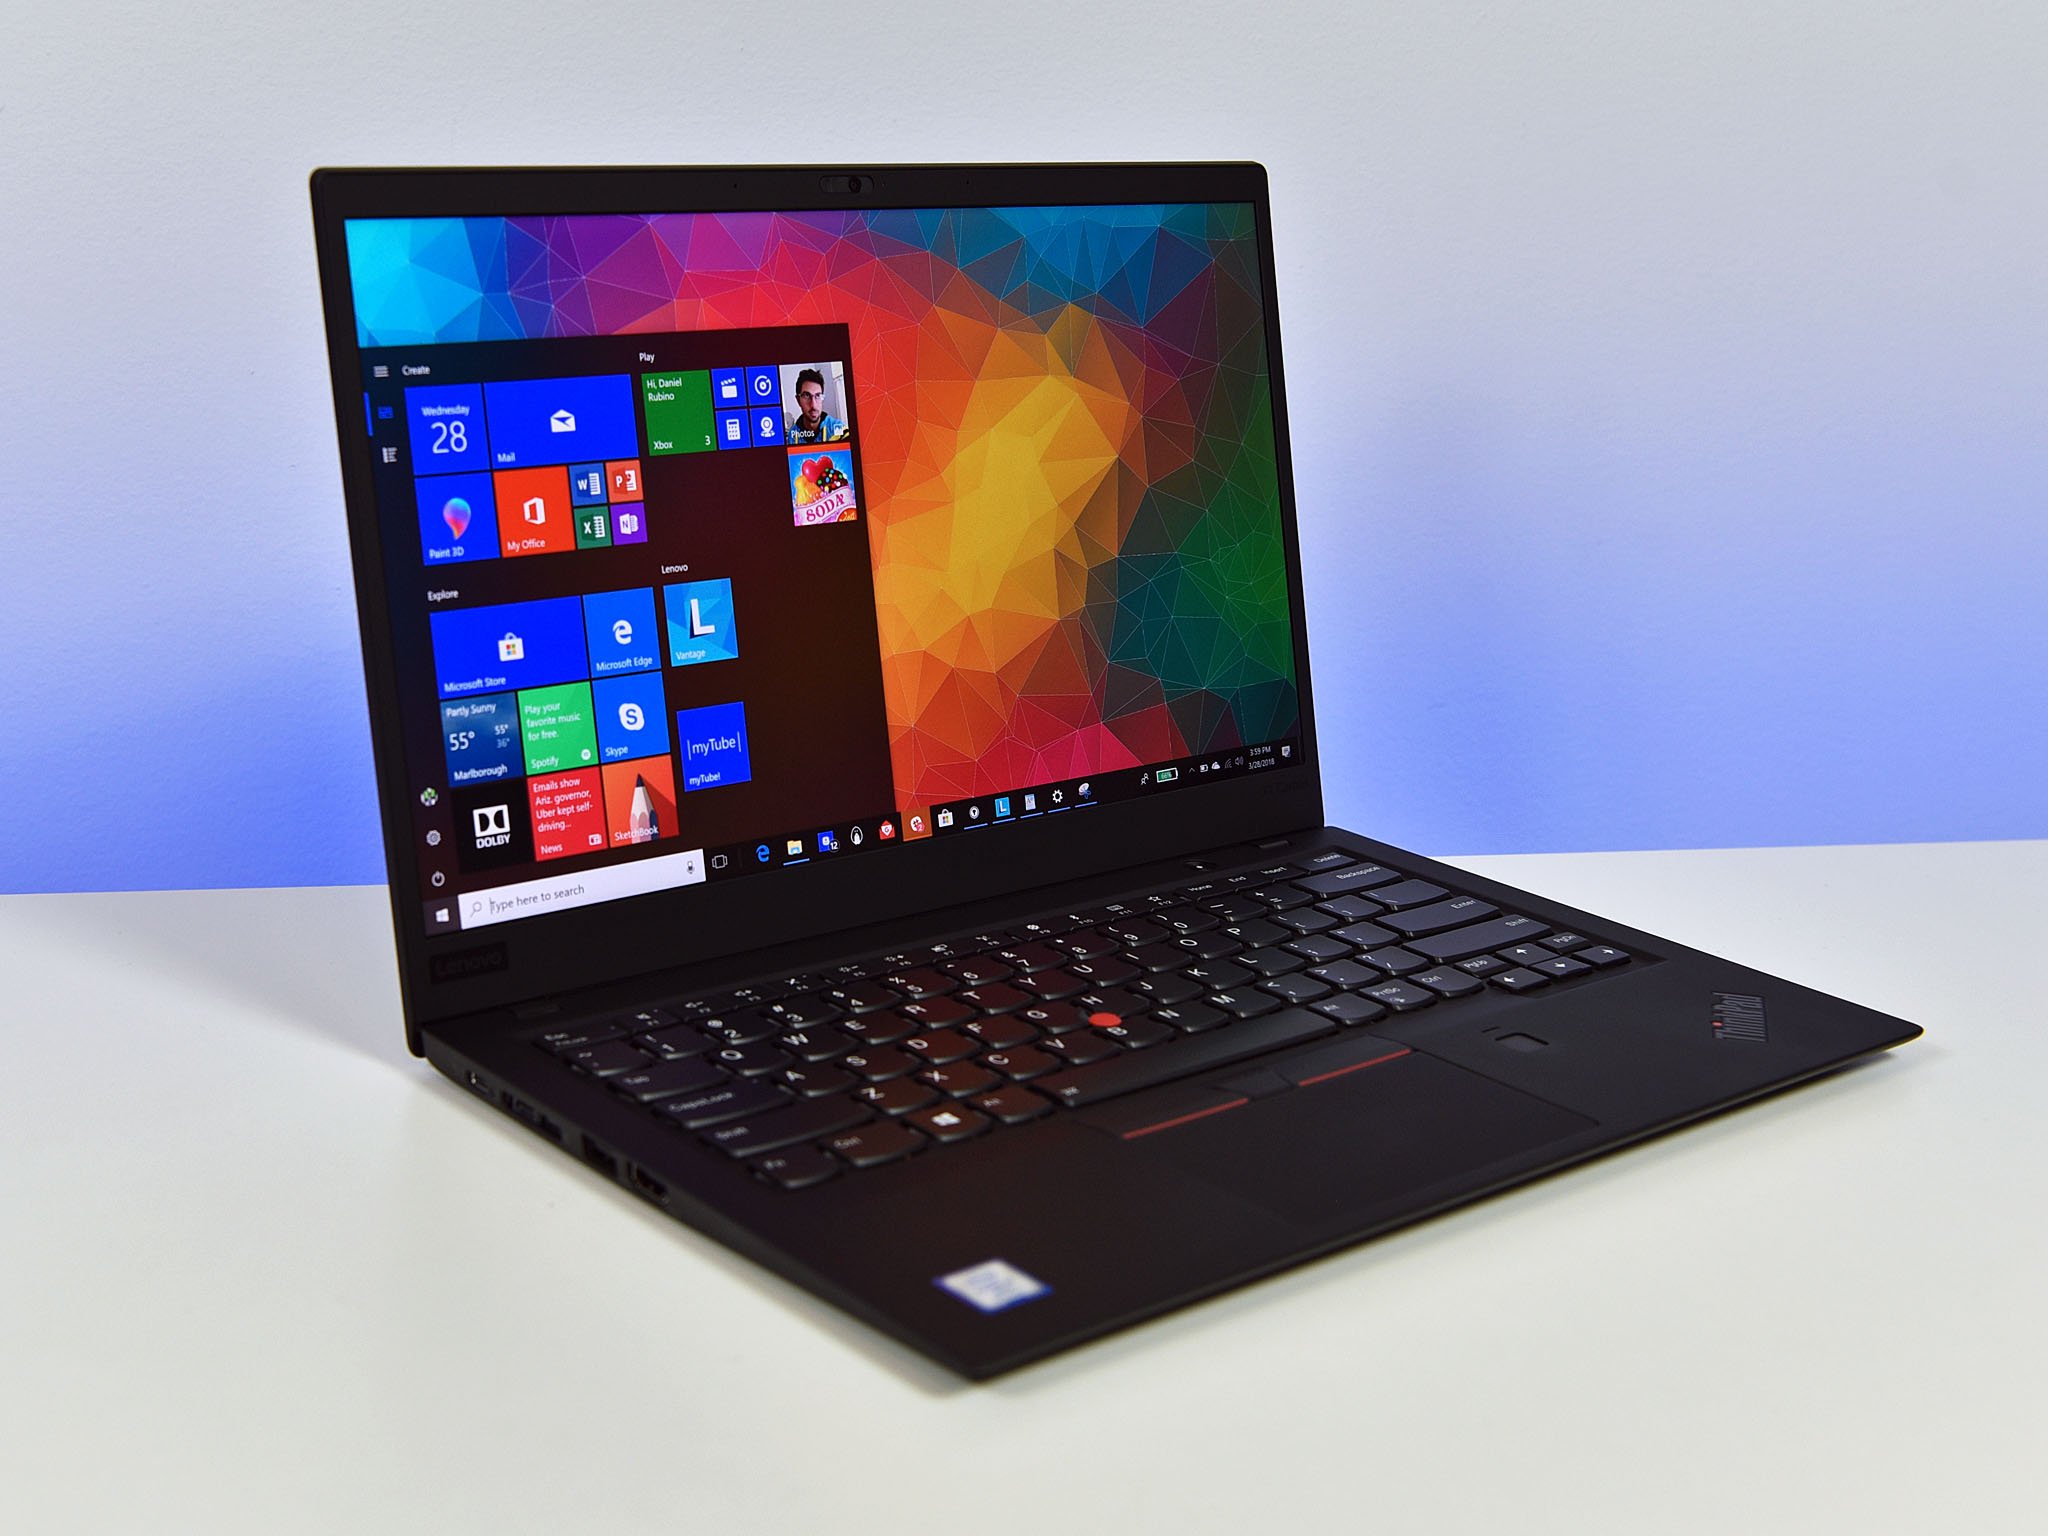 Lenovo X1 Carbon (2018) [Review]: A Nearly Perfect Laptop | Windows Central